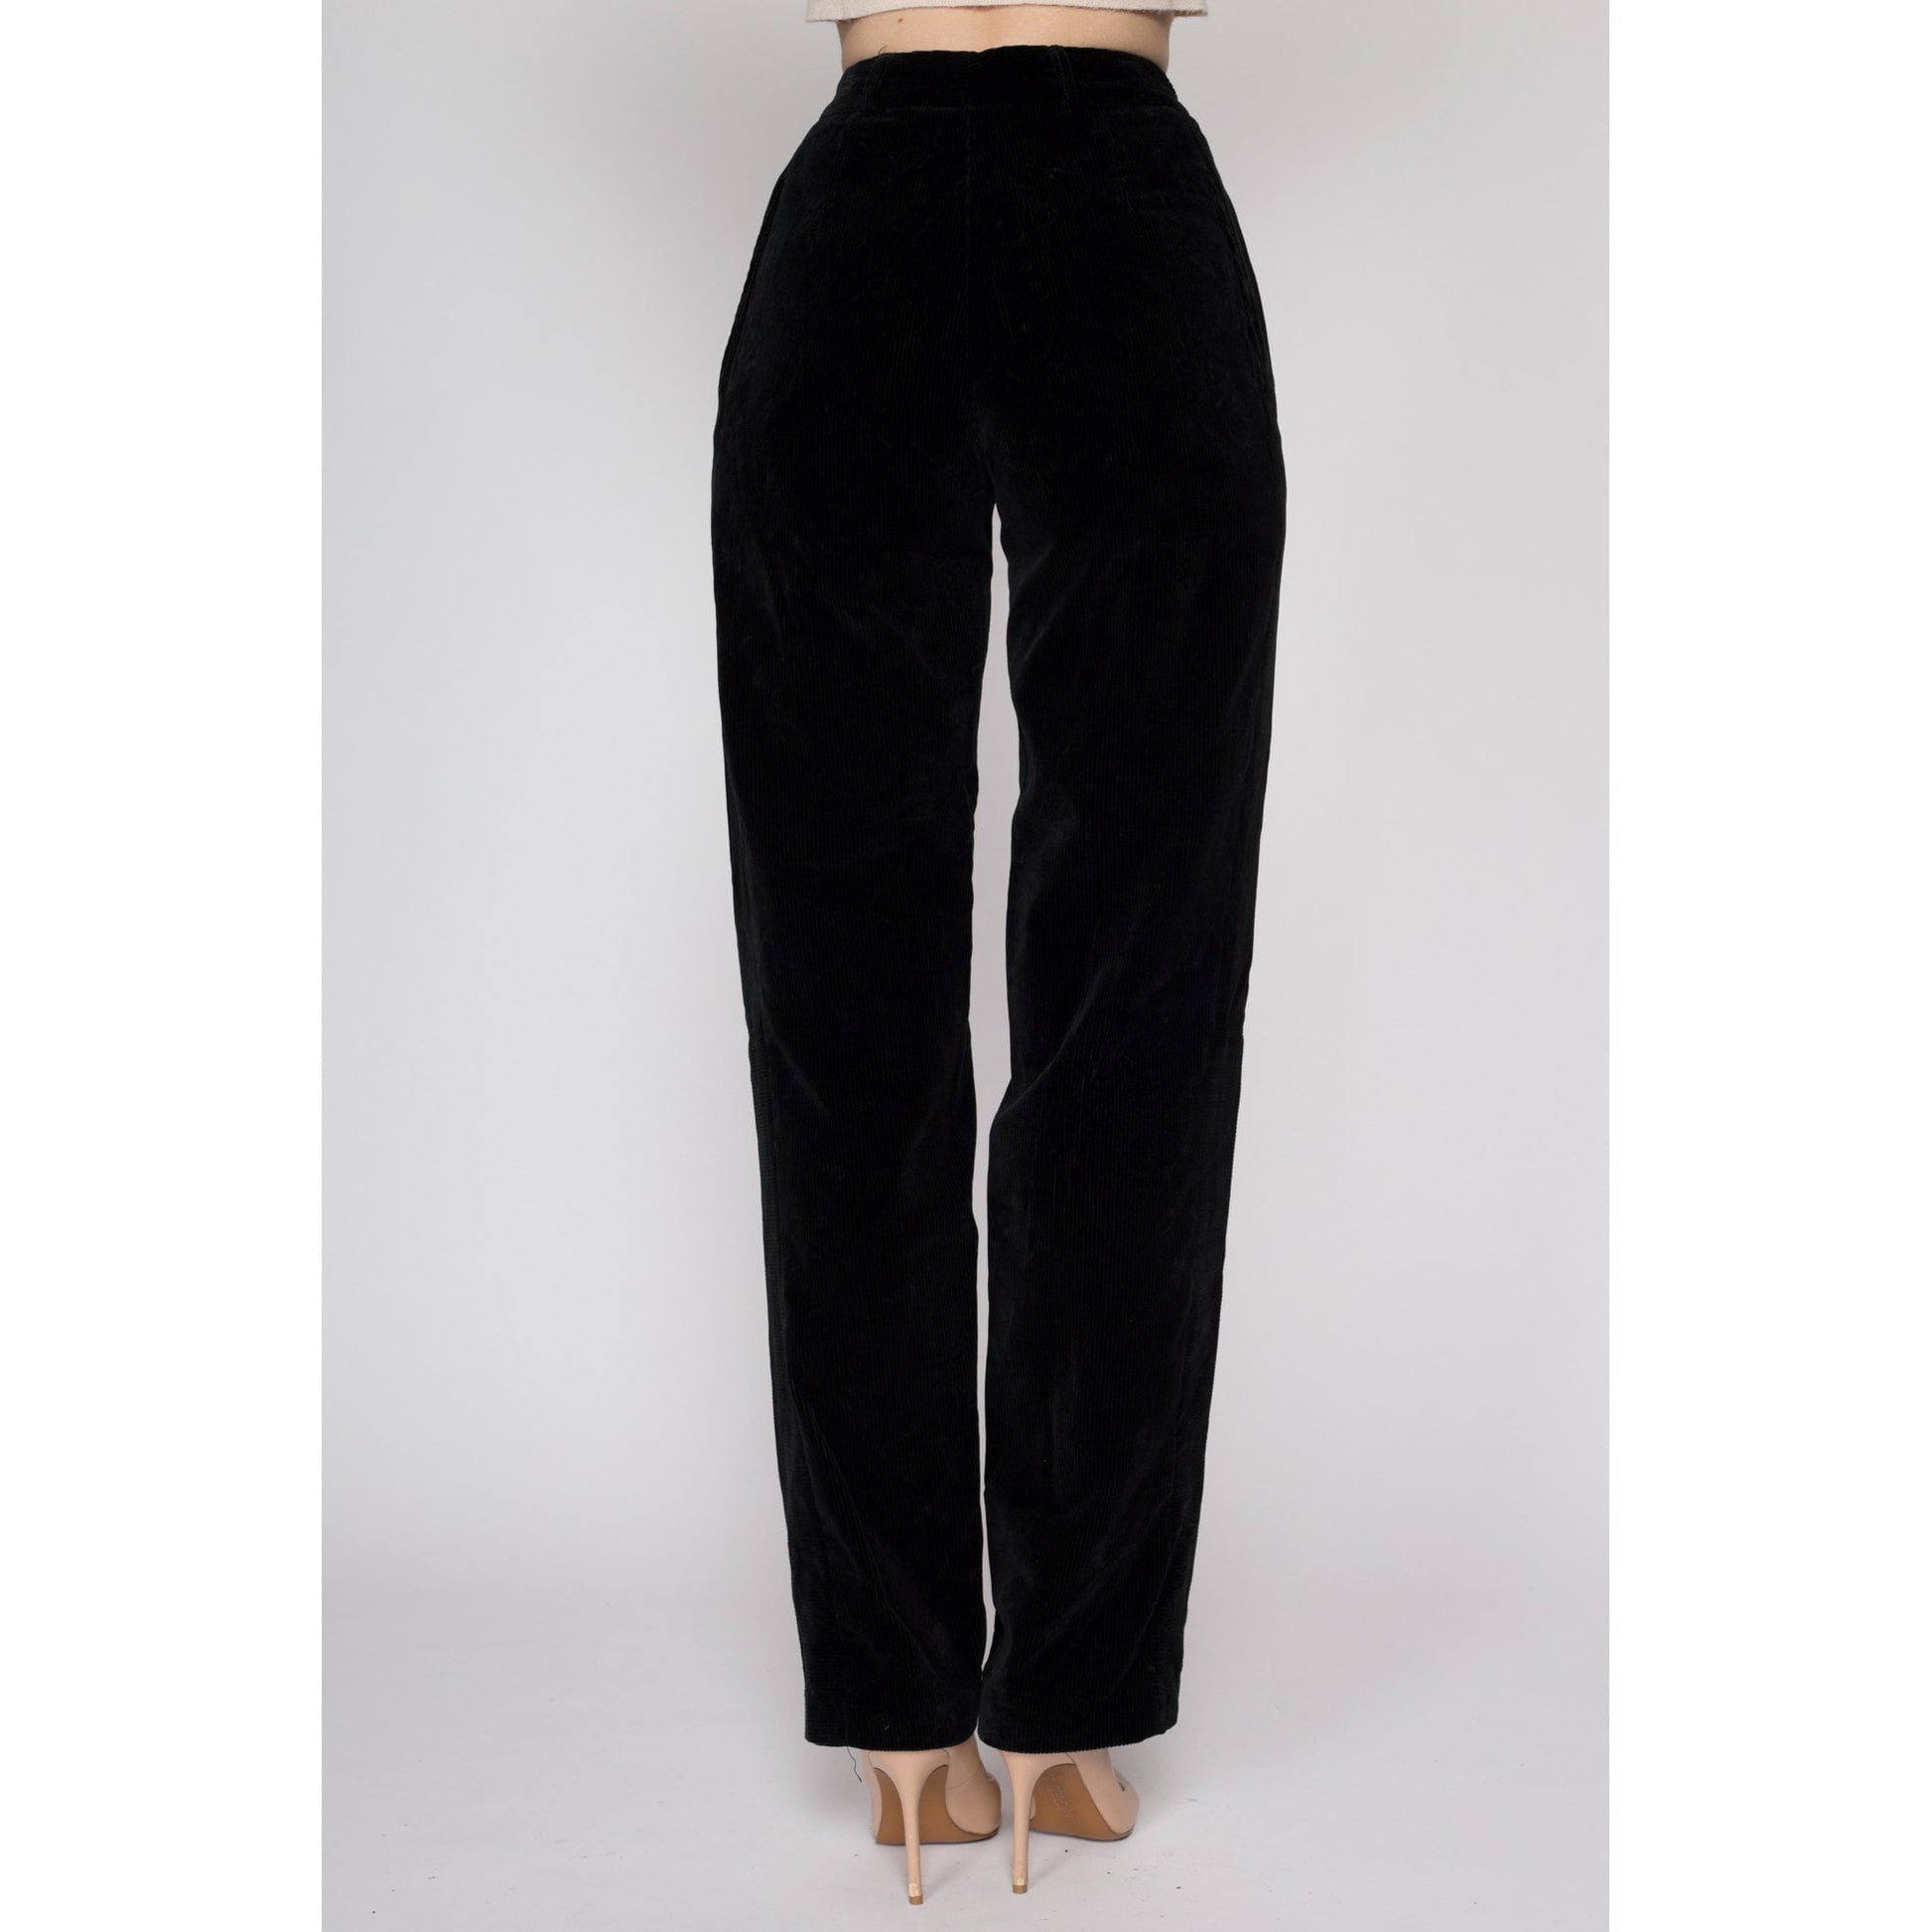 XS 70s Black Corduroy High Waisted Pants 22.5" | Retro Vintage Tall Long Inseam Pleated Trousers